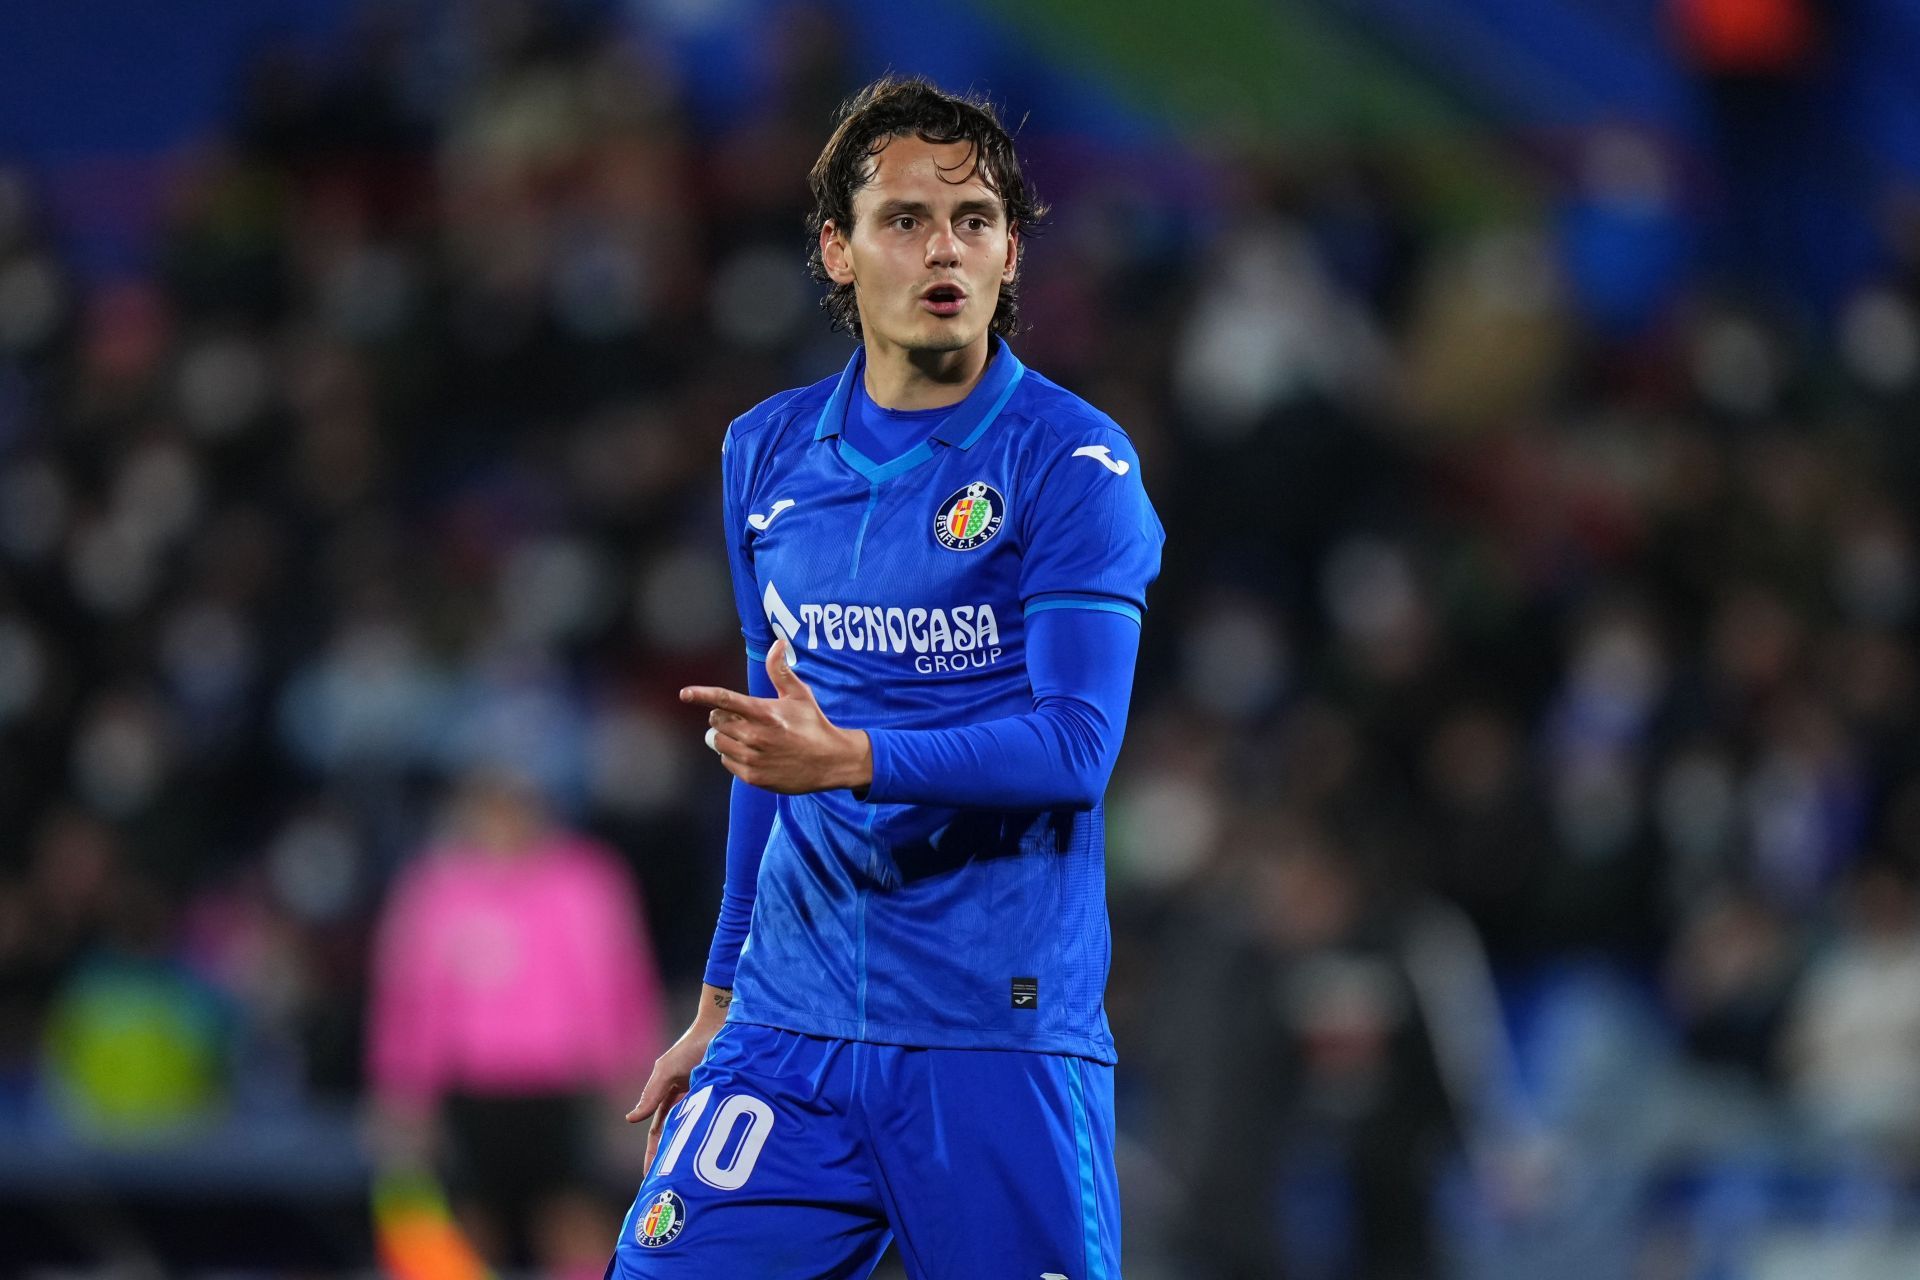 Getafe star Enes Unal has been key in helping his side stay above the relegation zone in La Liga